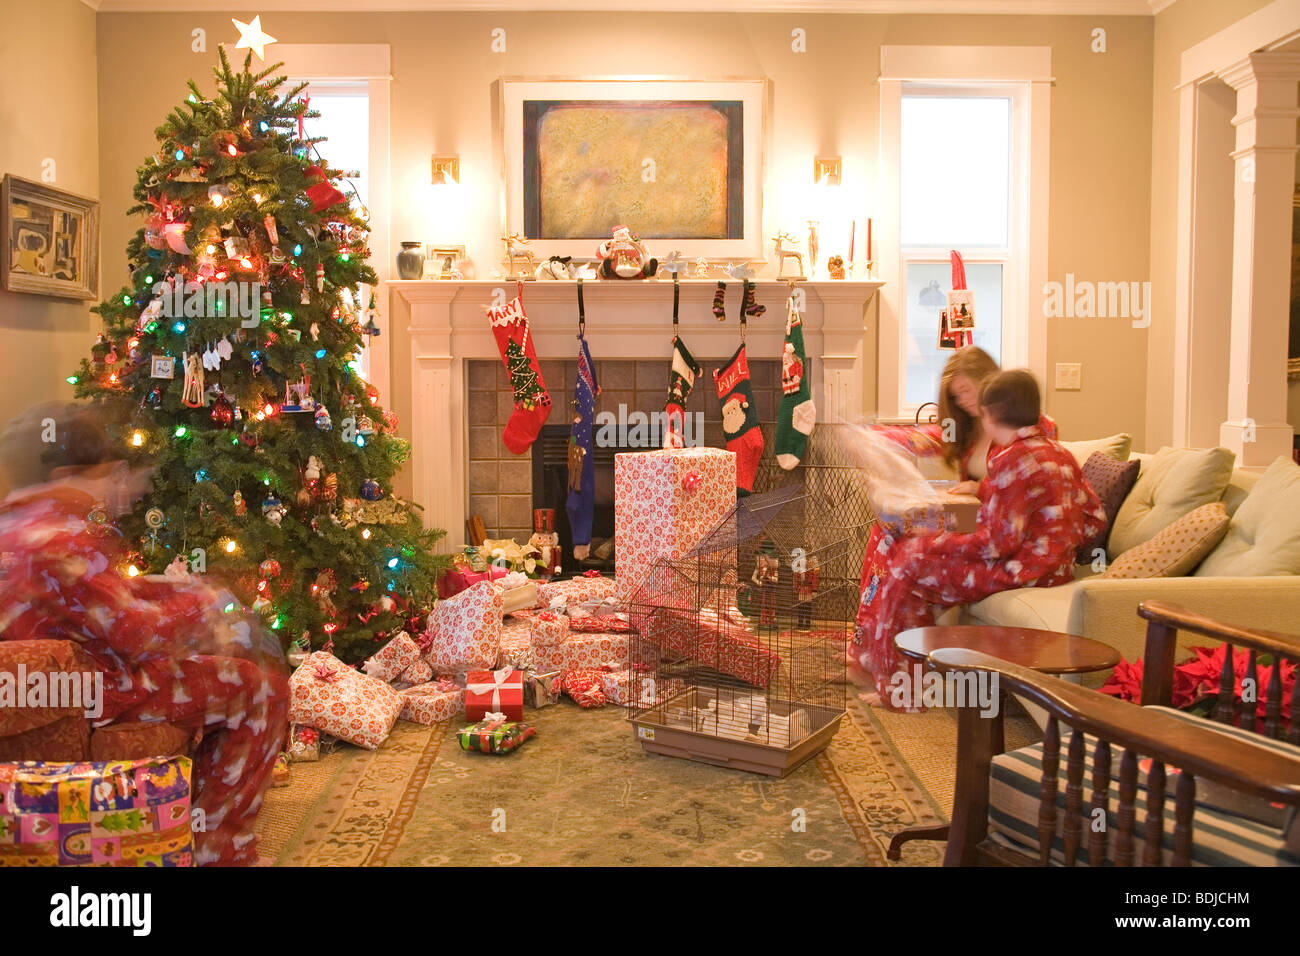 Kids Opening Presents on Christmas Morning Stock Photo